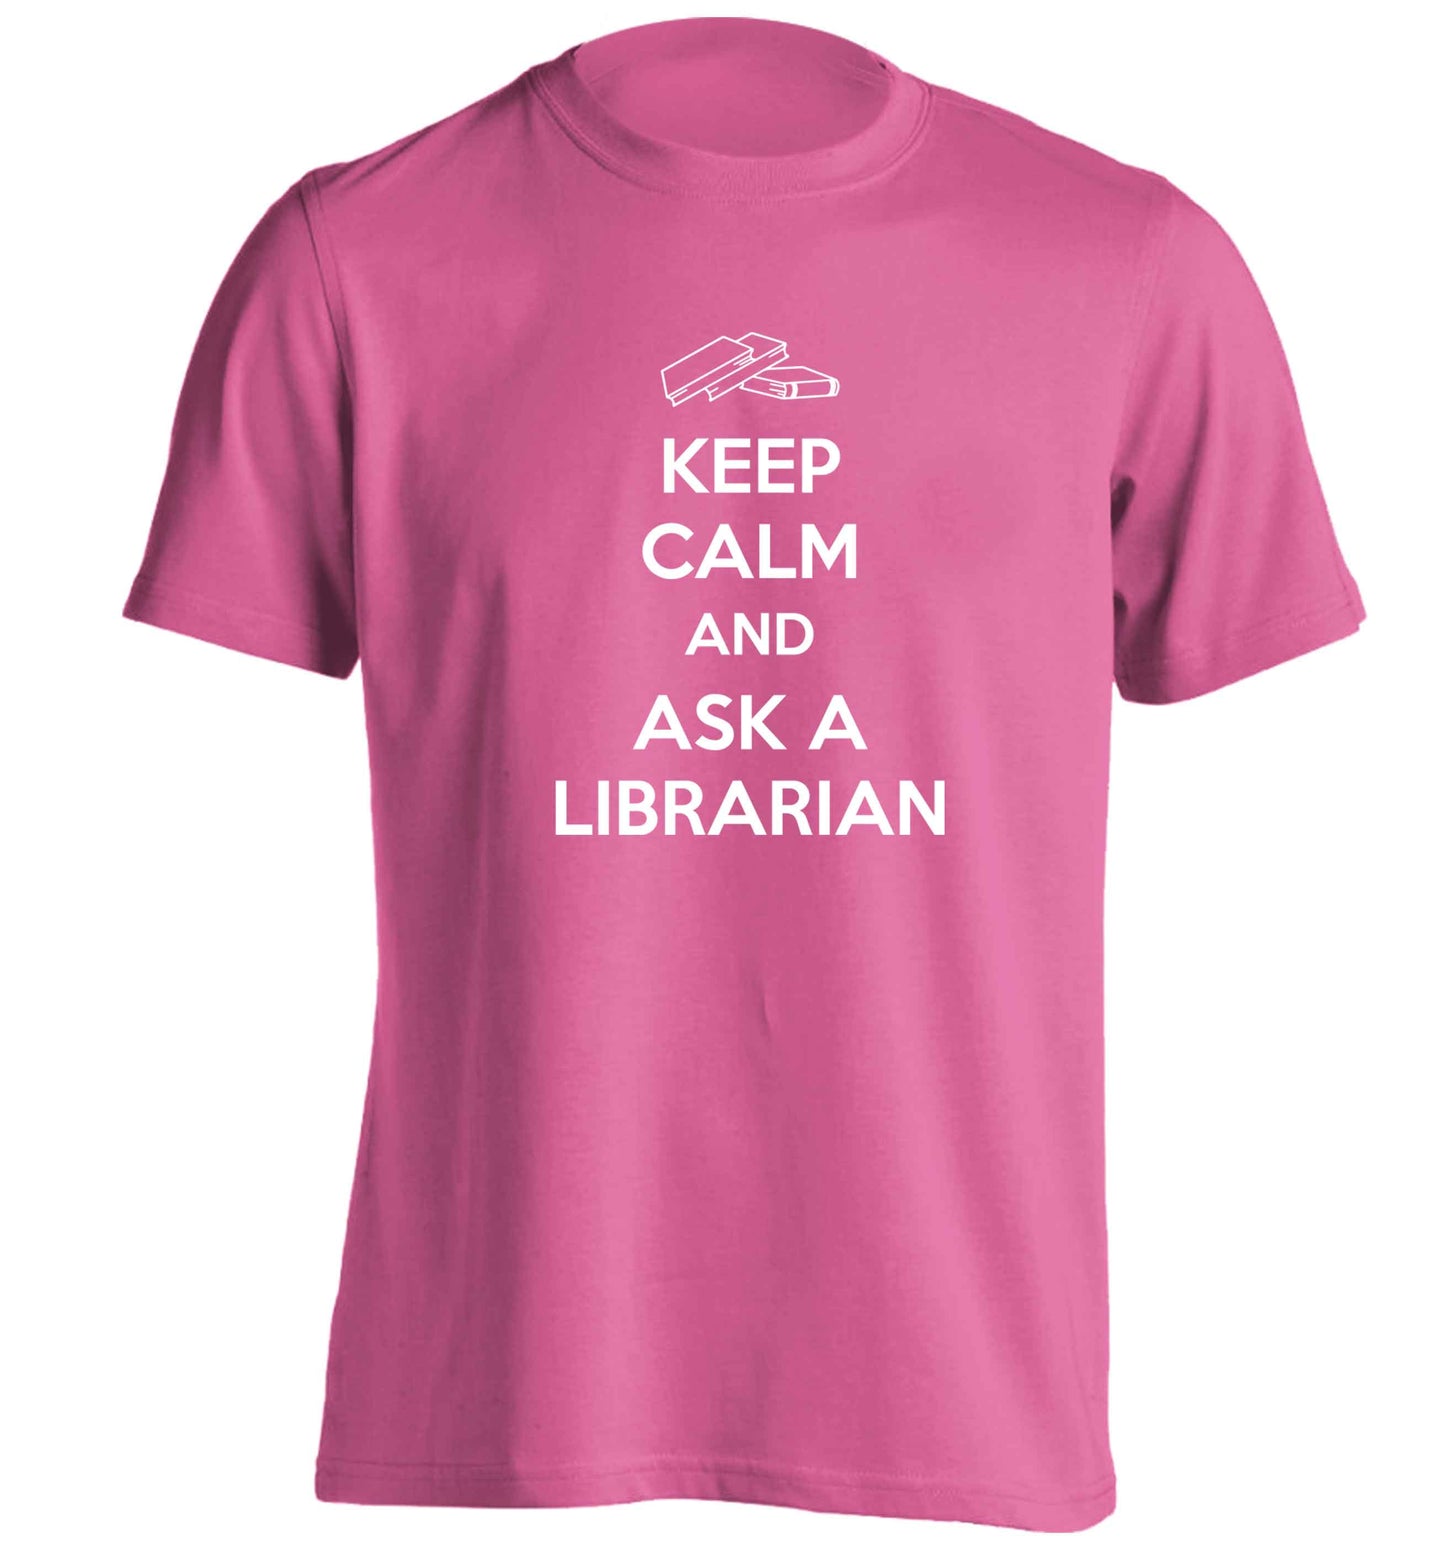 Keep calm and ask a librarian adults unisex pink Tshirt 2XL